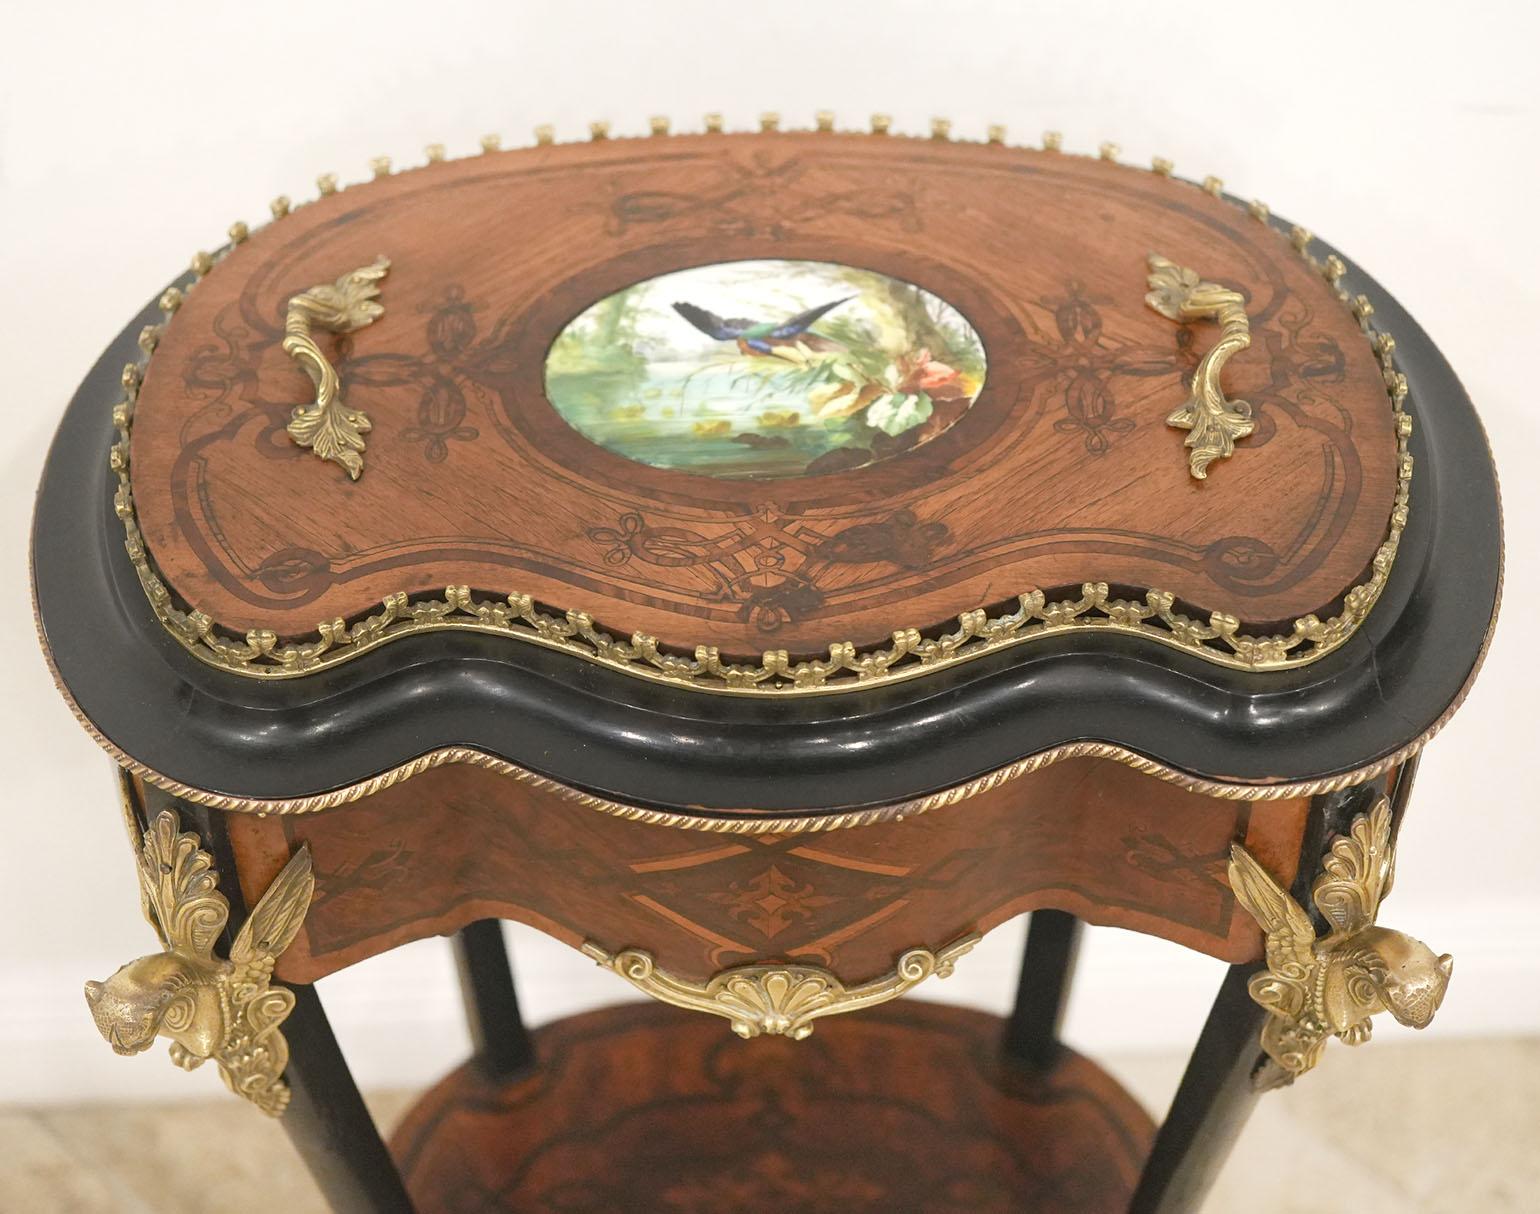 19th Century 19th Ct. French Victorian Inlaid Table / Planter with Hand Painted Tile